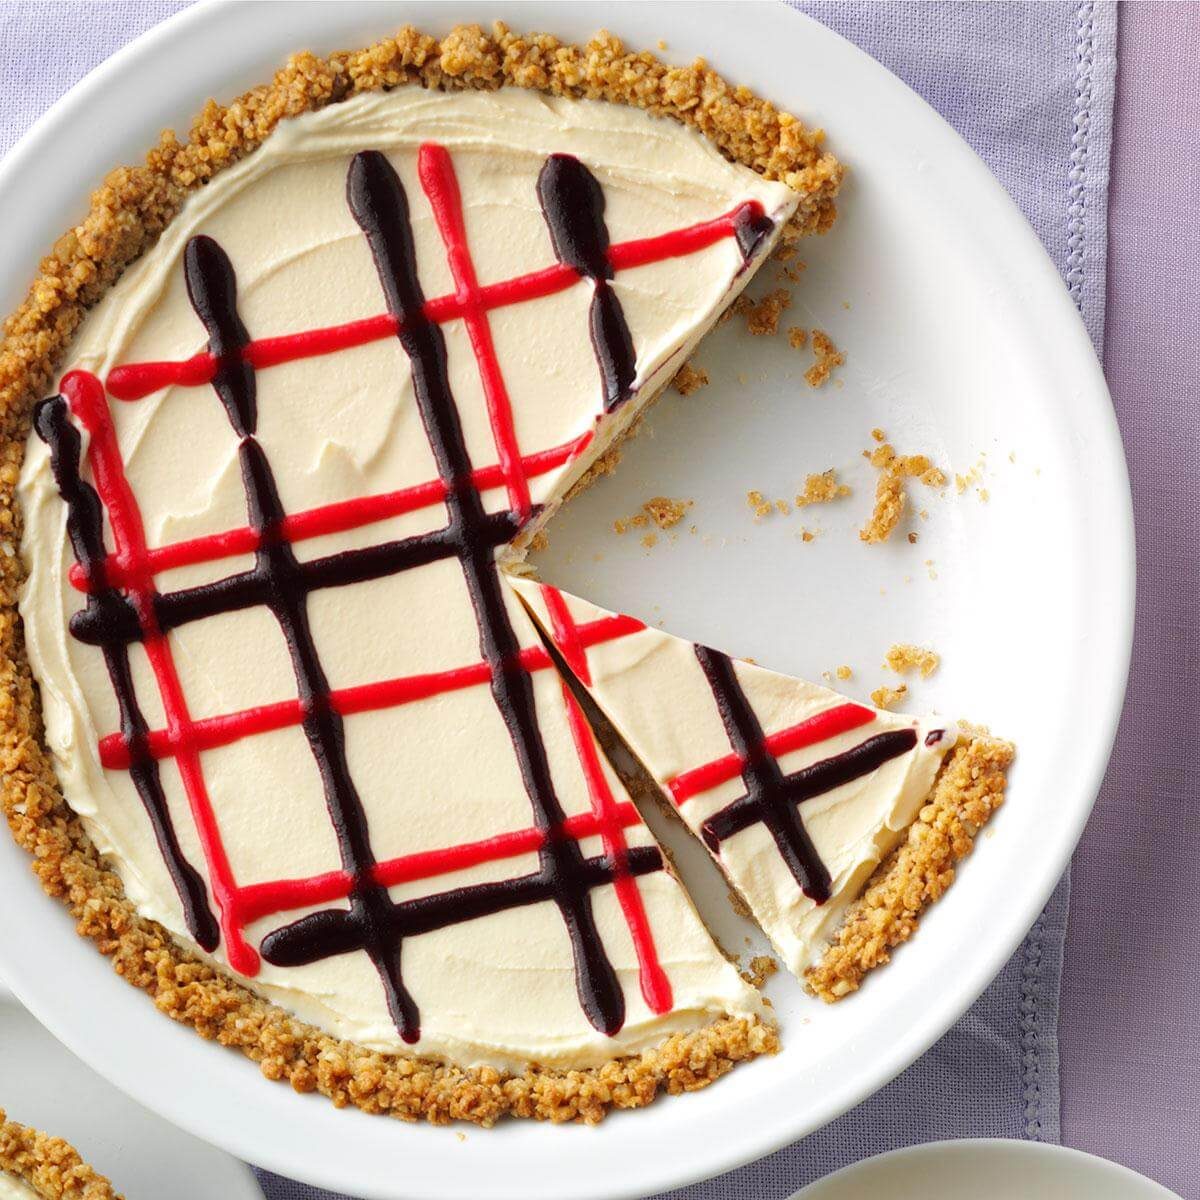 Red White And Blueberry Ice Cream Pie With Granola Crust Recipe Taste Of Home 